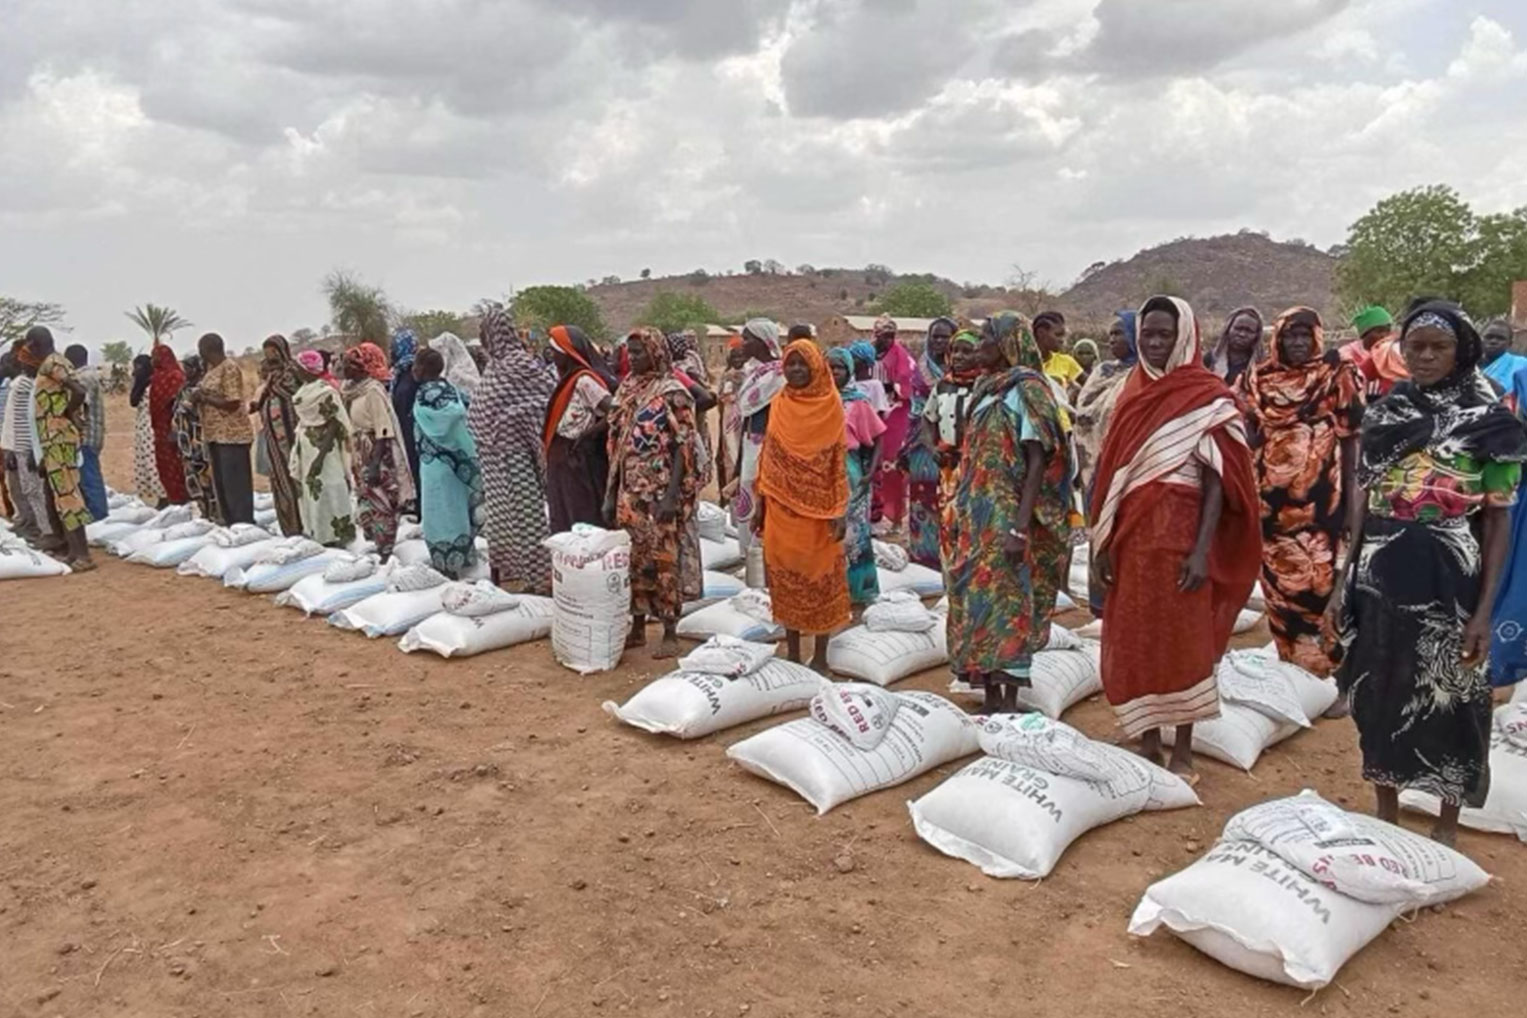 Samaritan's Purse is sending food relief to the region as families face desperate times in Kordofan. Many of their crops were eaten by locusts and an influx of displaced people is straining the already impoverished communities.